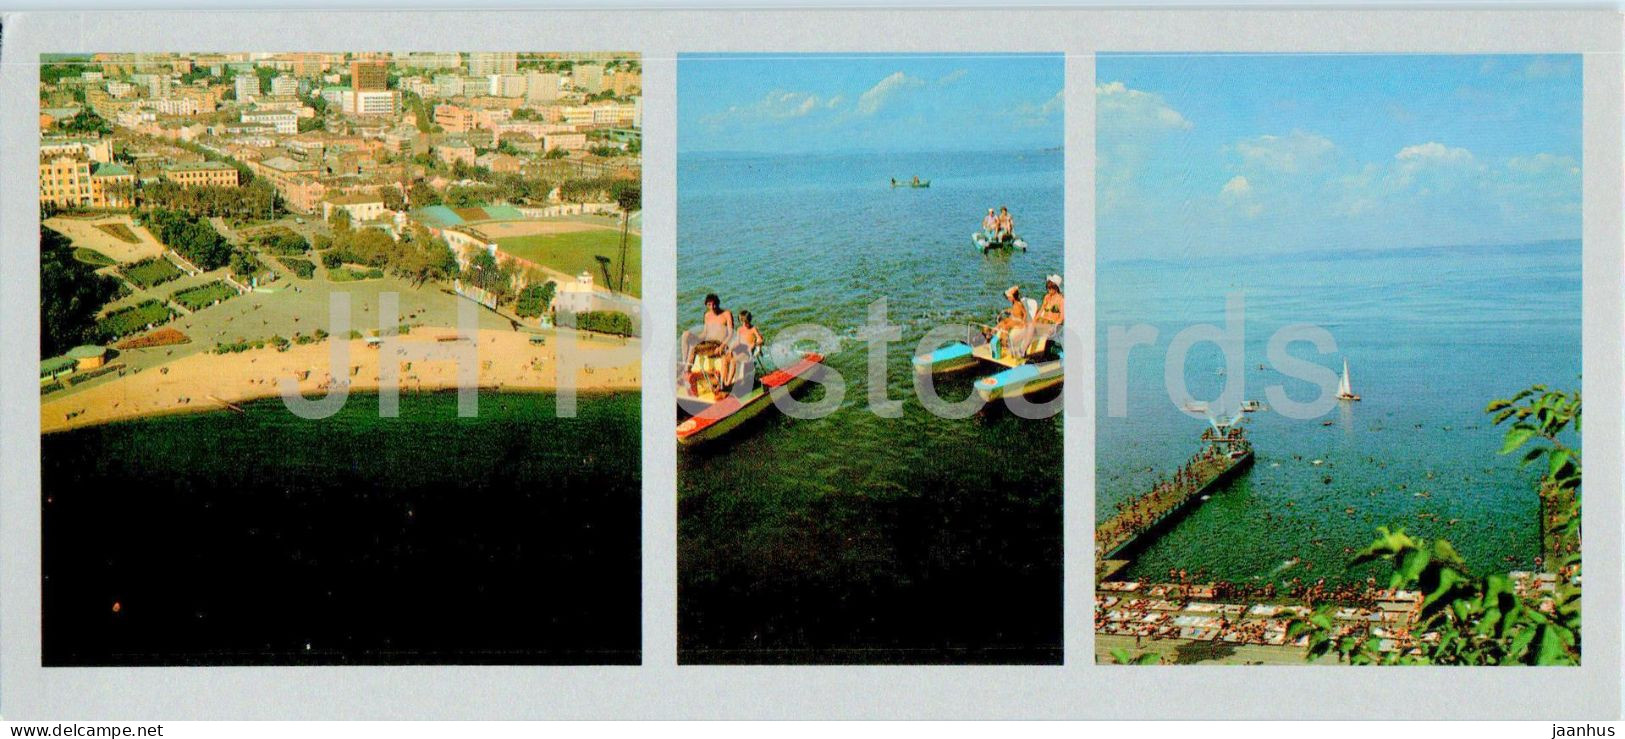 Bay Of The Peter The Great - Vladivostok - Amursky Bay - 1980 - Russia USSR - Unused - Rusland